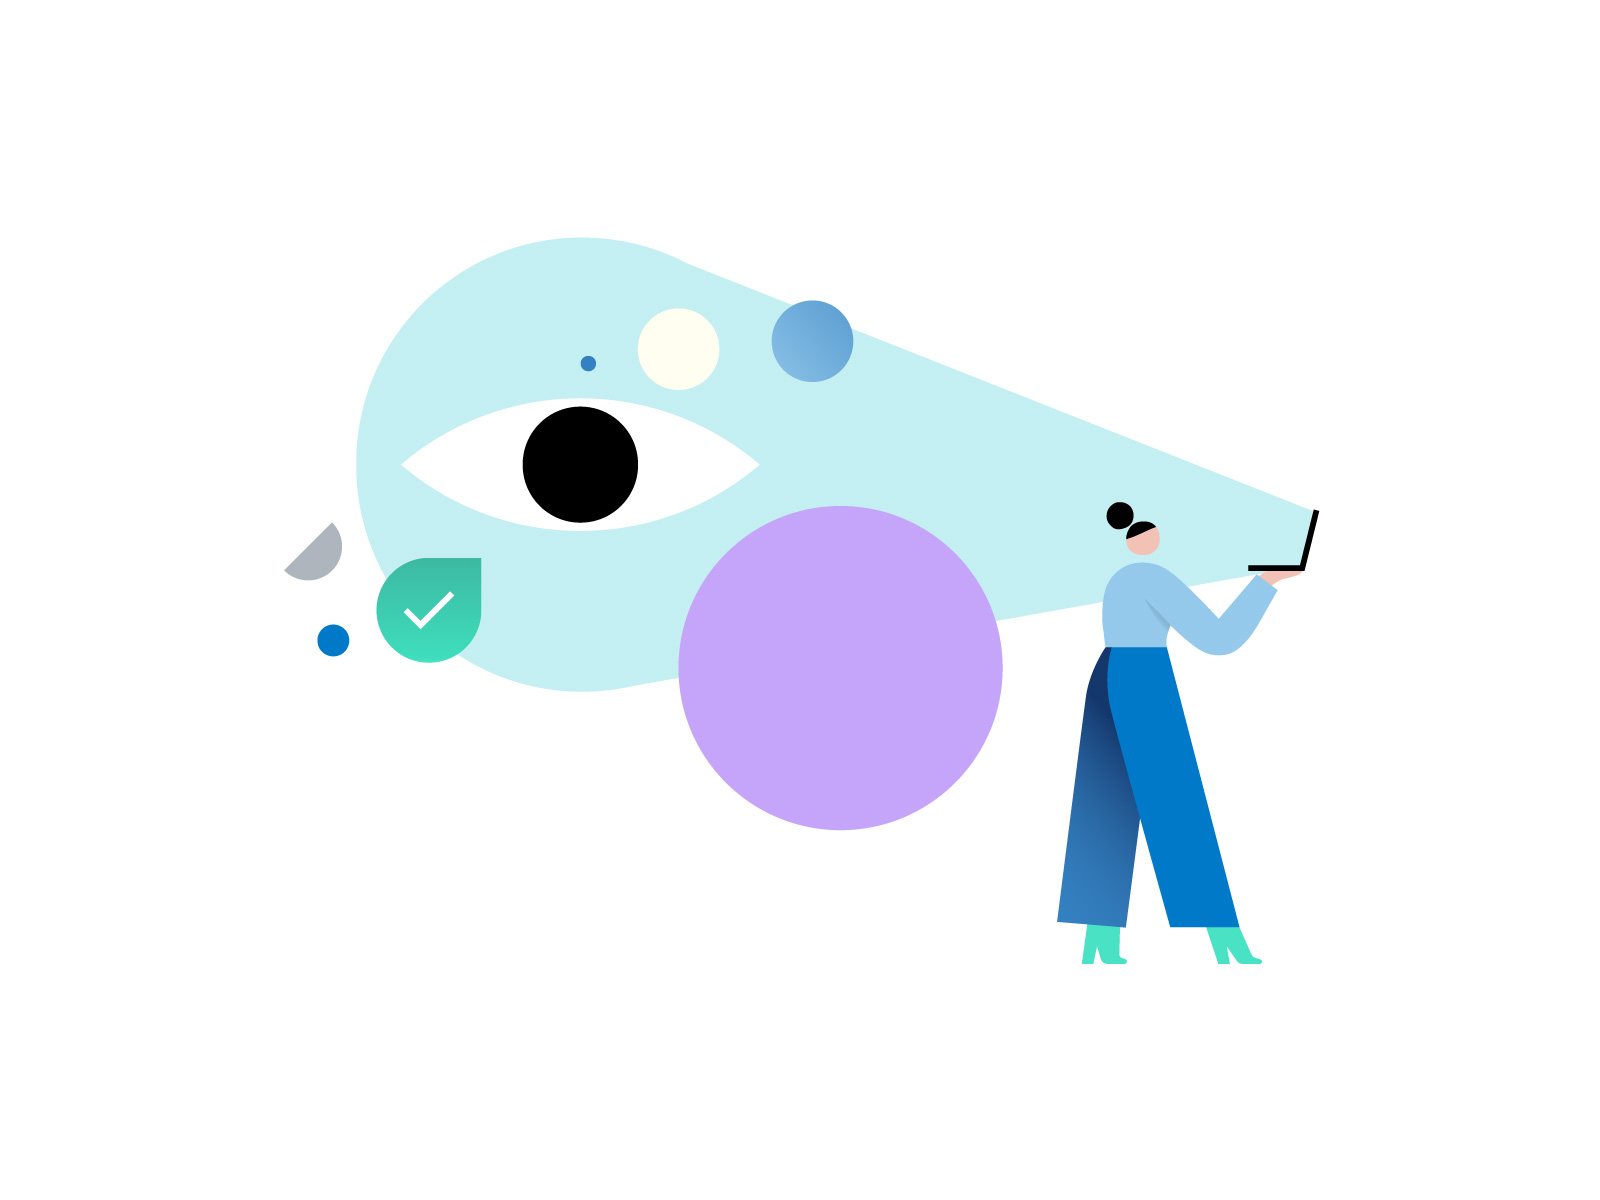 Searching for inspiration! character character design check color computer contrast design eye geometry illo illustration minimal office shapes watch